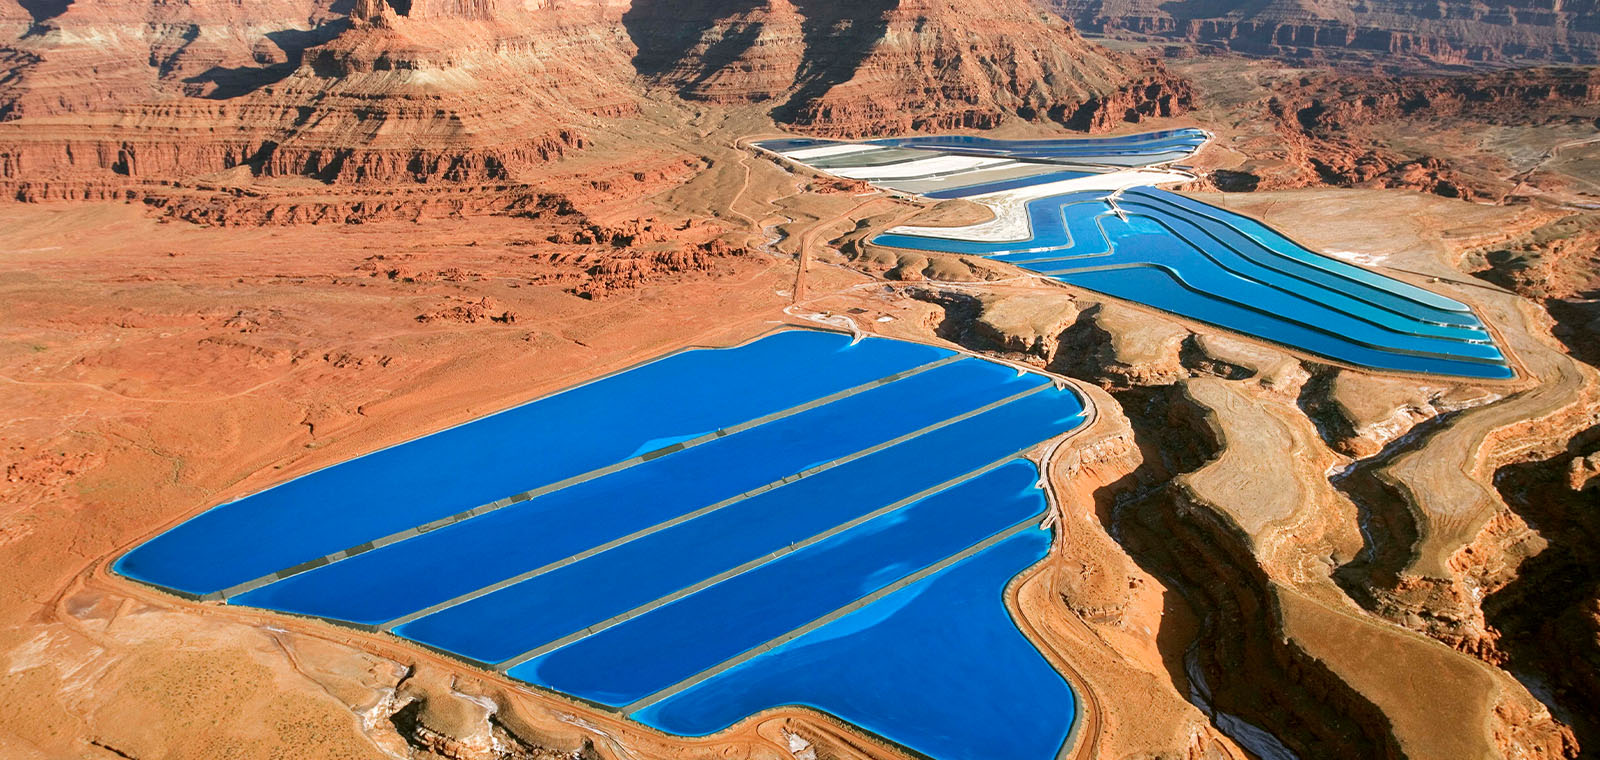  An aerial view of a rocky red desert is sharply contrasted by two royal blue, brim-filled water treatment reservoirs.